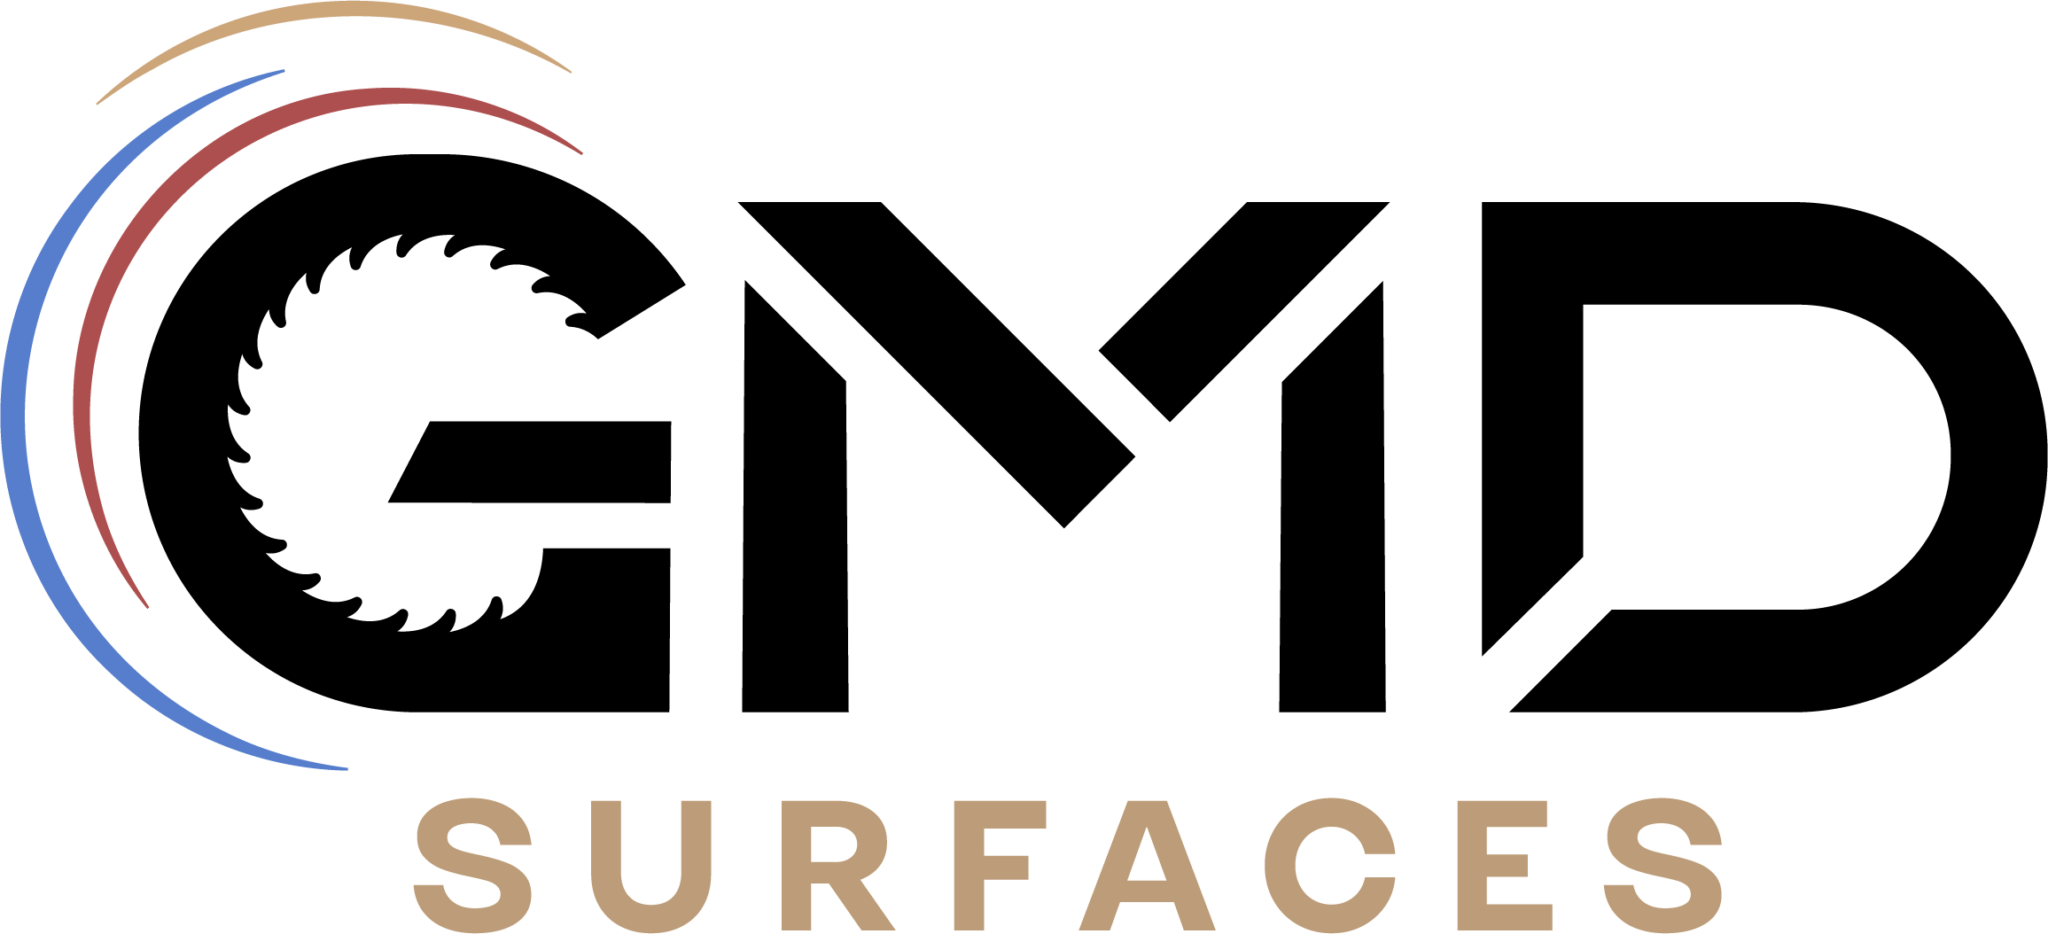 Logo | GMD Surfaces